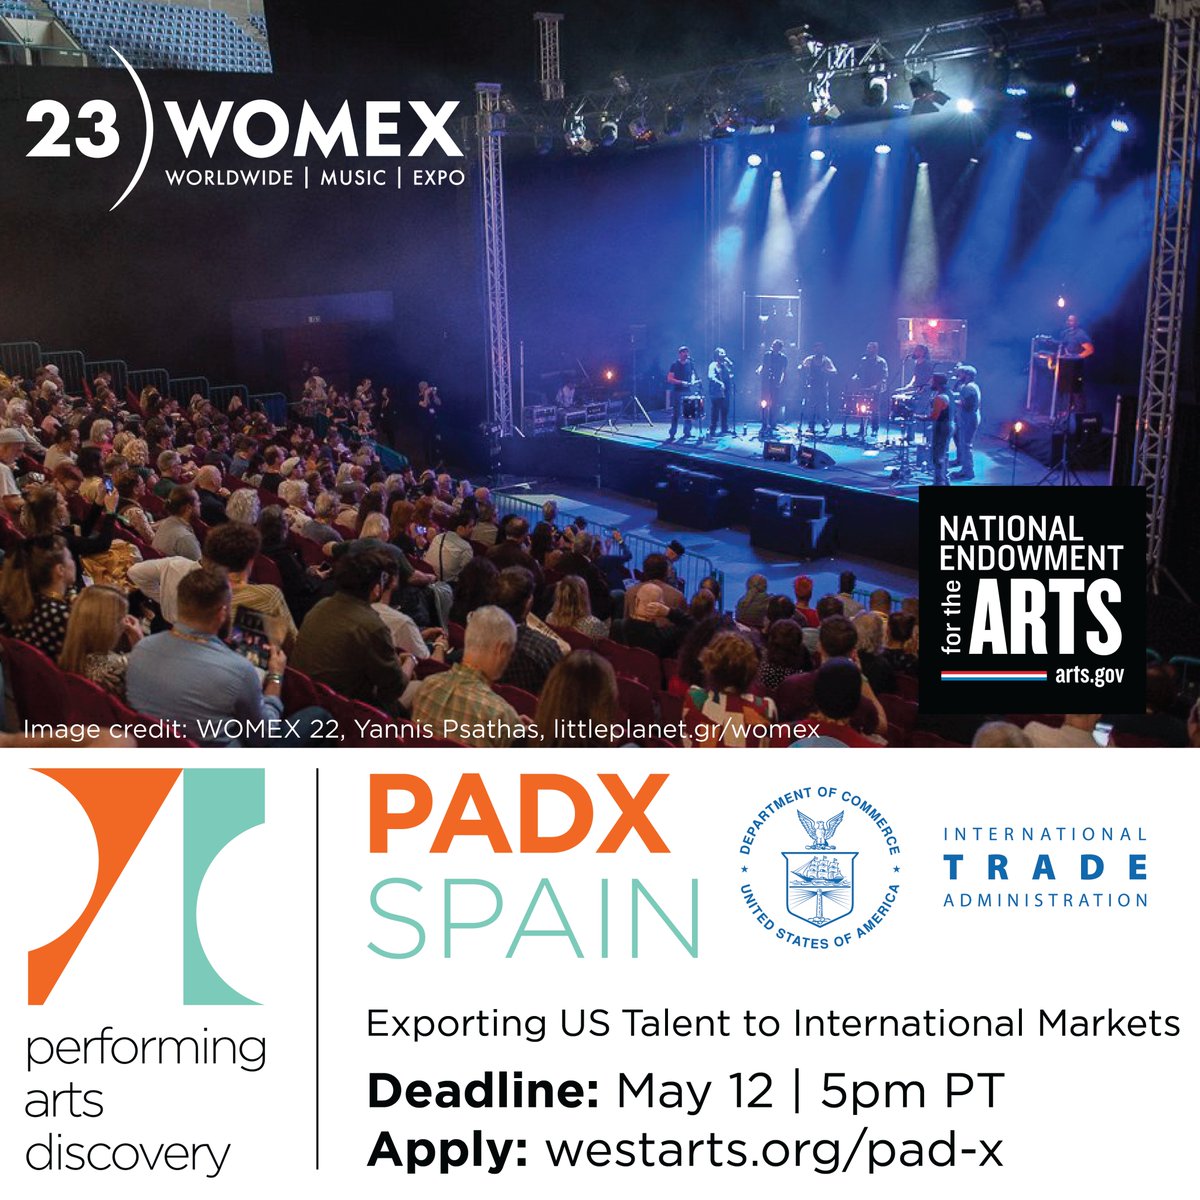 Be part of WAA’s first ever PADX delegation: join us this October 25 - 29 in A Coruña, Spain for WOMEX. Want to know more? Join us on Monday, April 24 from 1pm - 2pm PT for an informational webinar on PADX westarts.org/pad-x